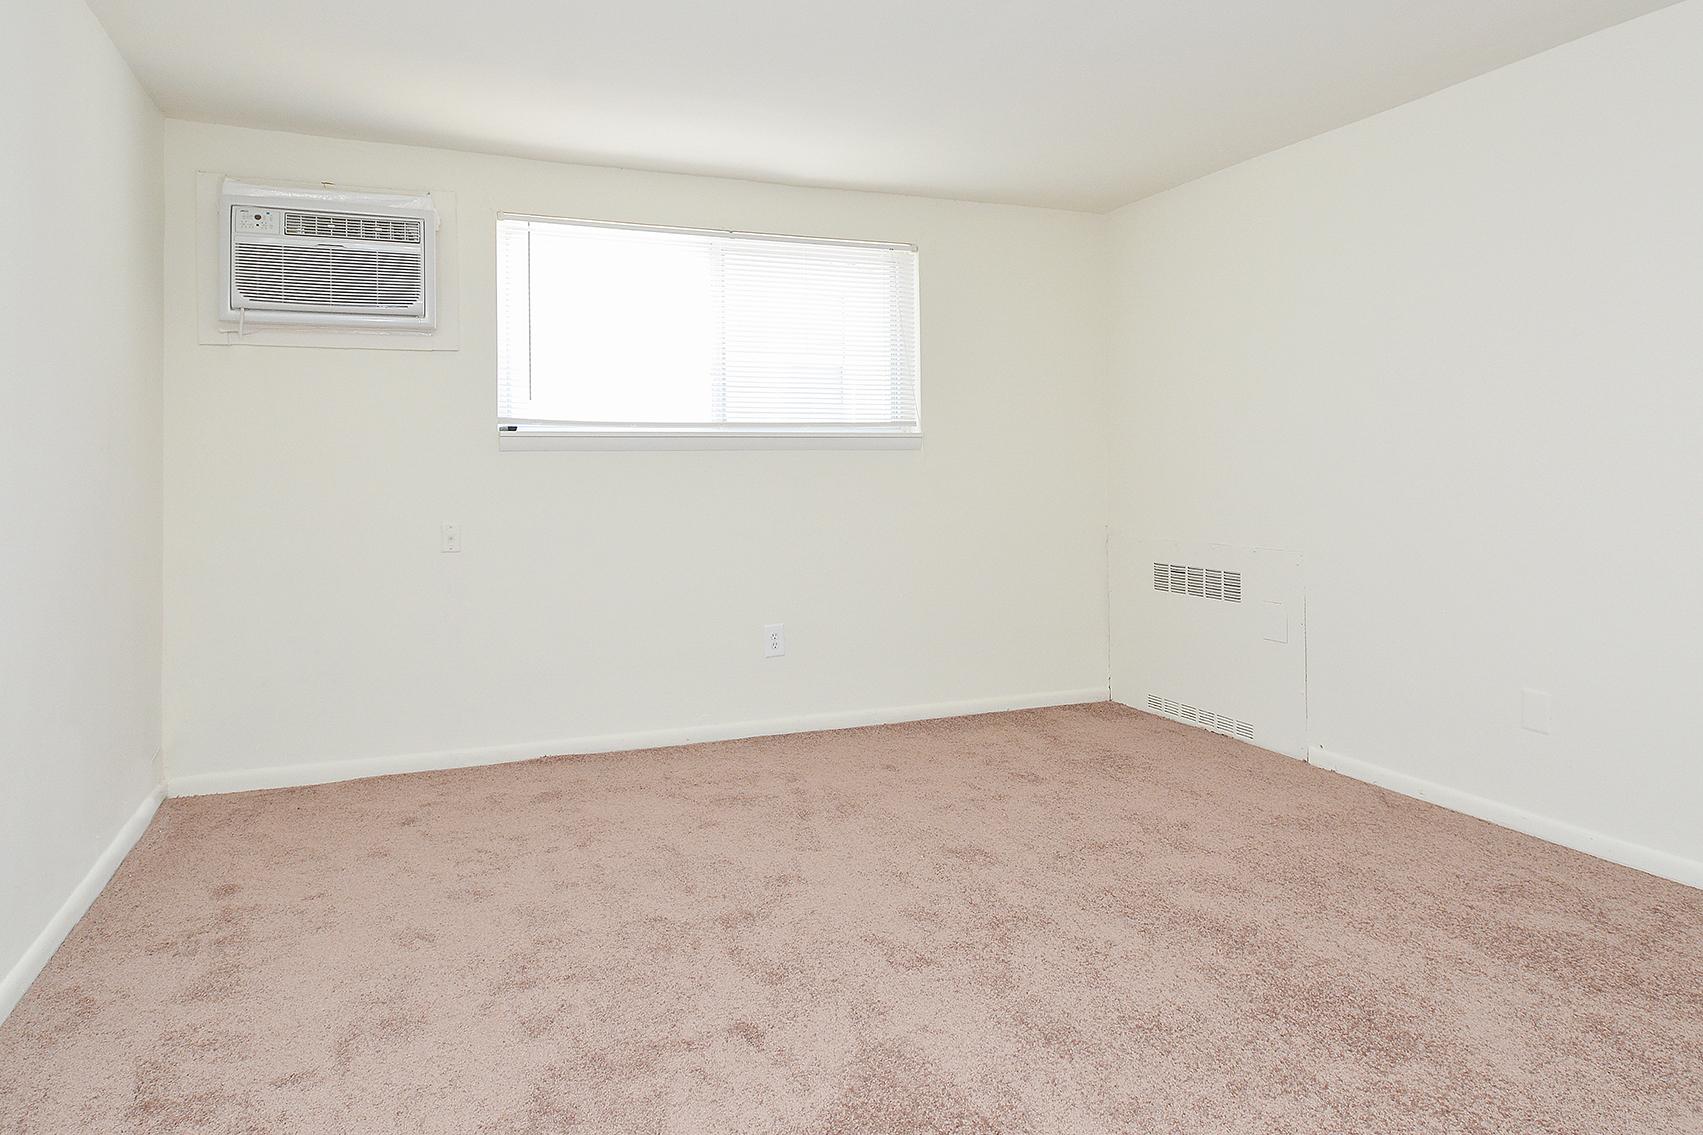 Carpeted bedroom space in an apartment at Hazel Apartments in Clifton Heights, PA.